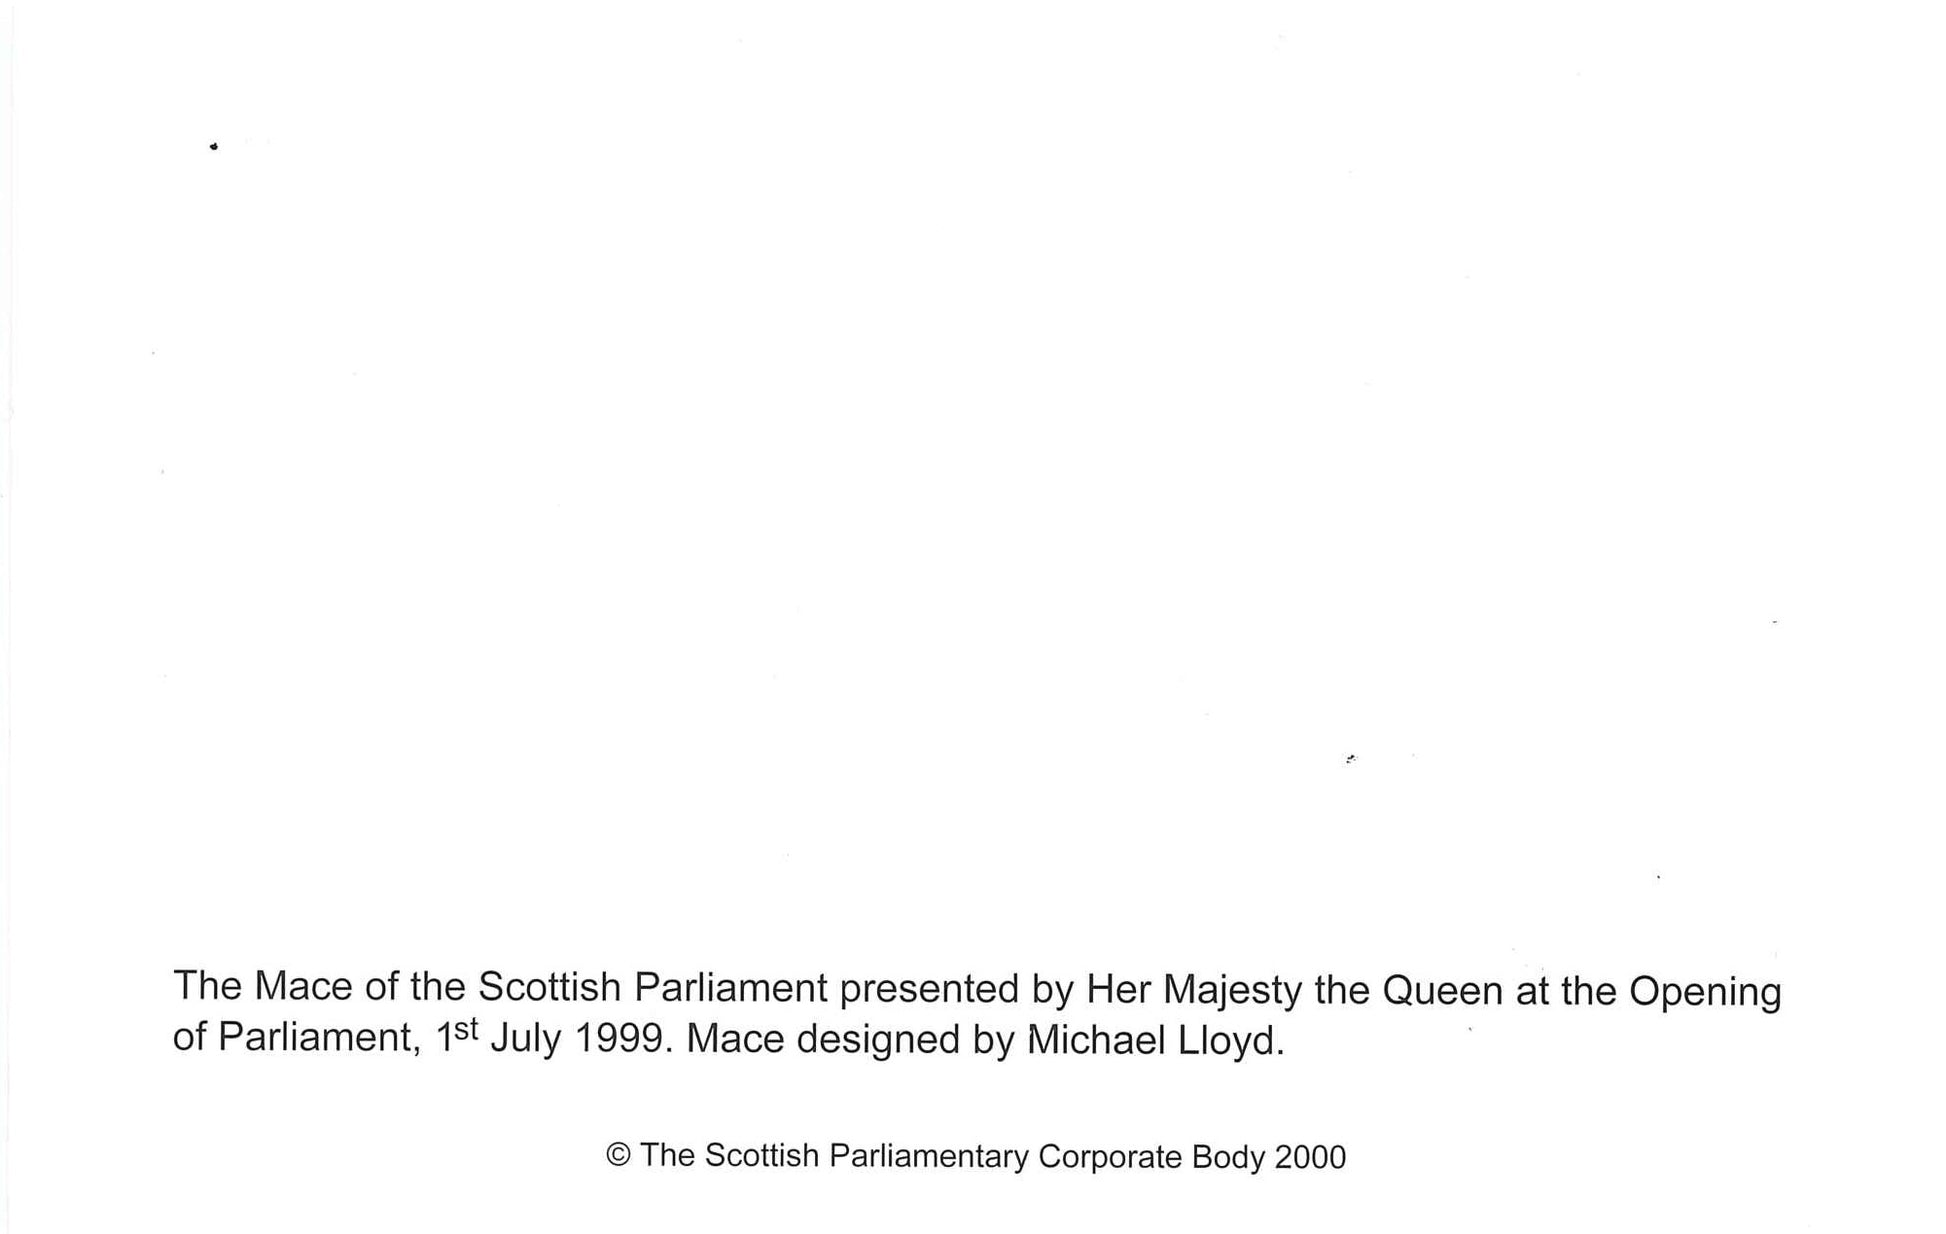 Back of the card. White with description: The Mace of the Scottish Parliament presented by Her Majesty the Queen at the Opening of Parliament, 1st July 1999. Mace designed by Michael Lloyd. 